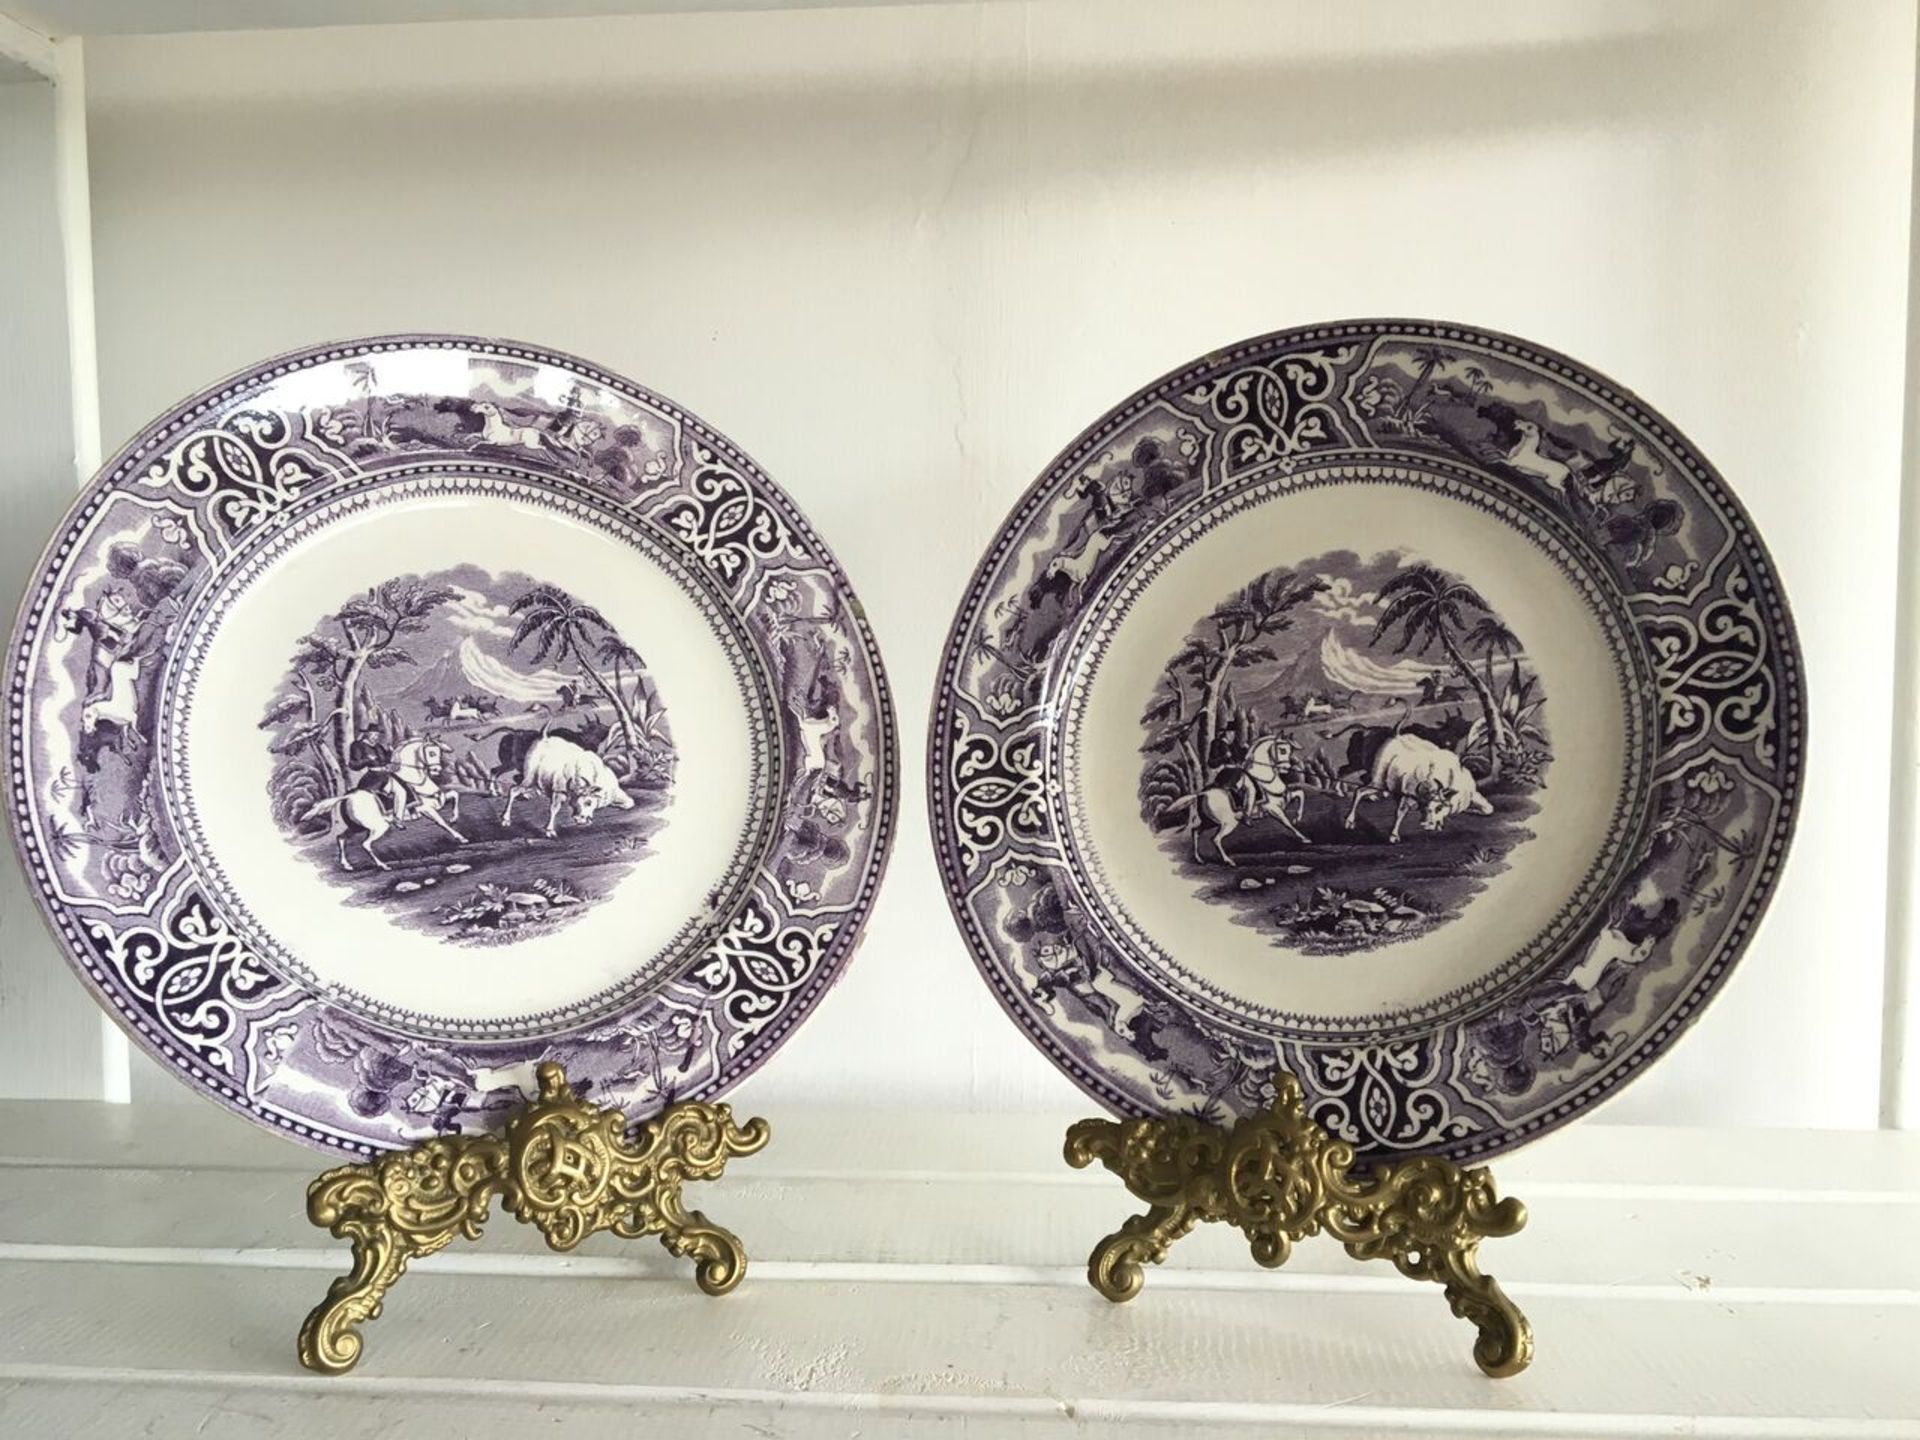 PAIR OF ANTIQUE 21CM TRANSFERWARE PLATES BY CALLERTON & SONS IN THE "TORO" PATTERN. CONDITION - BOTH